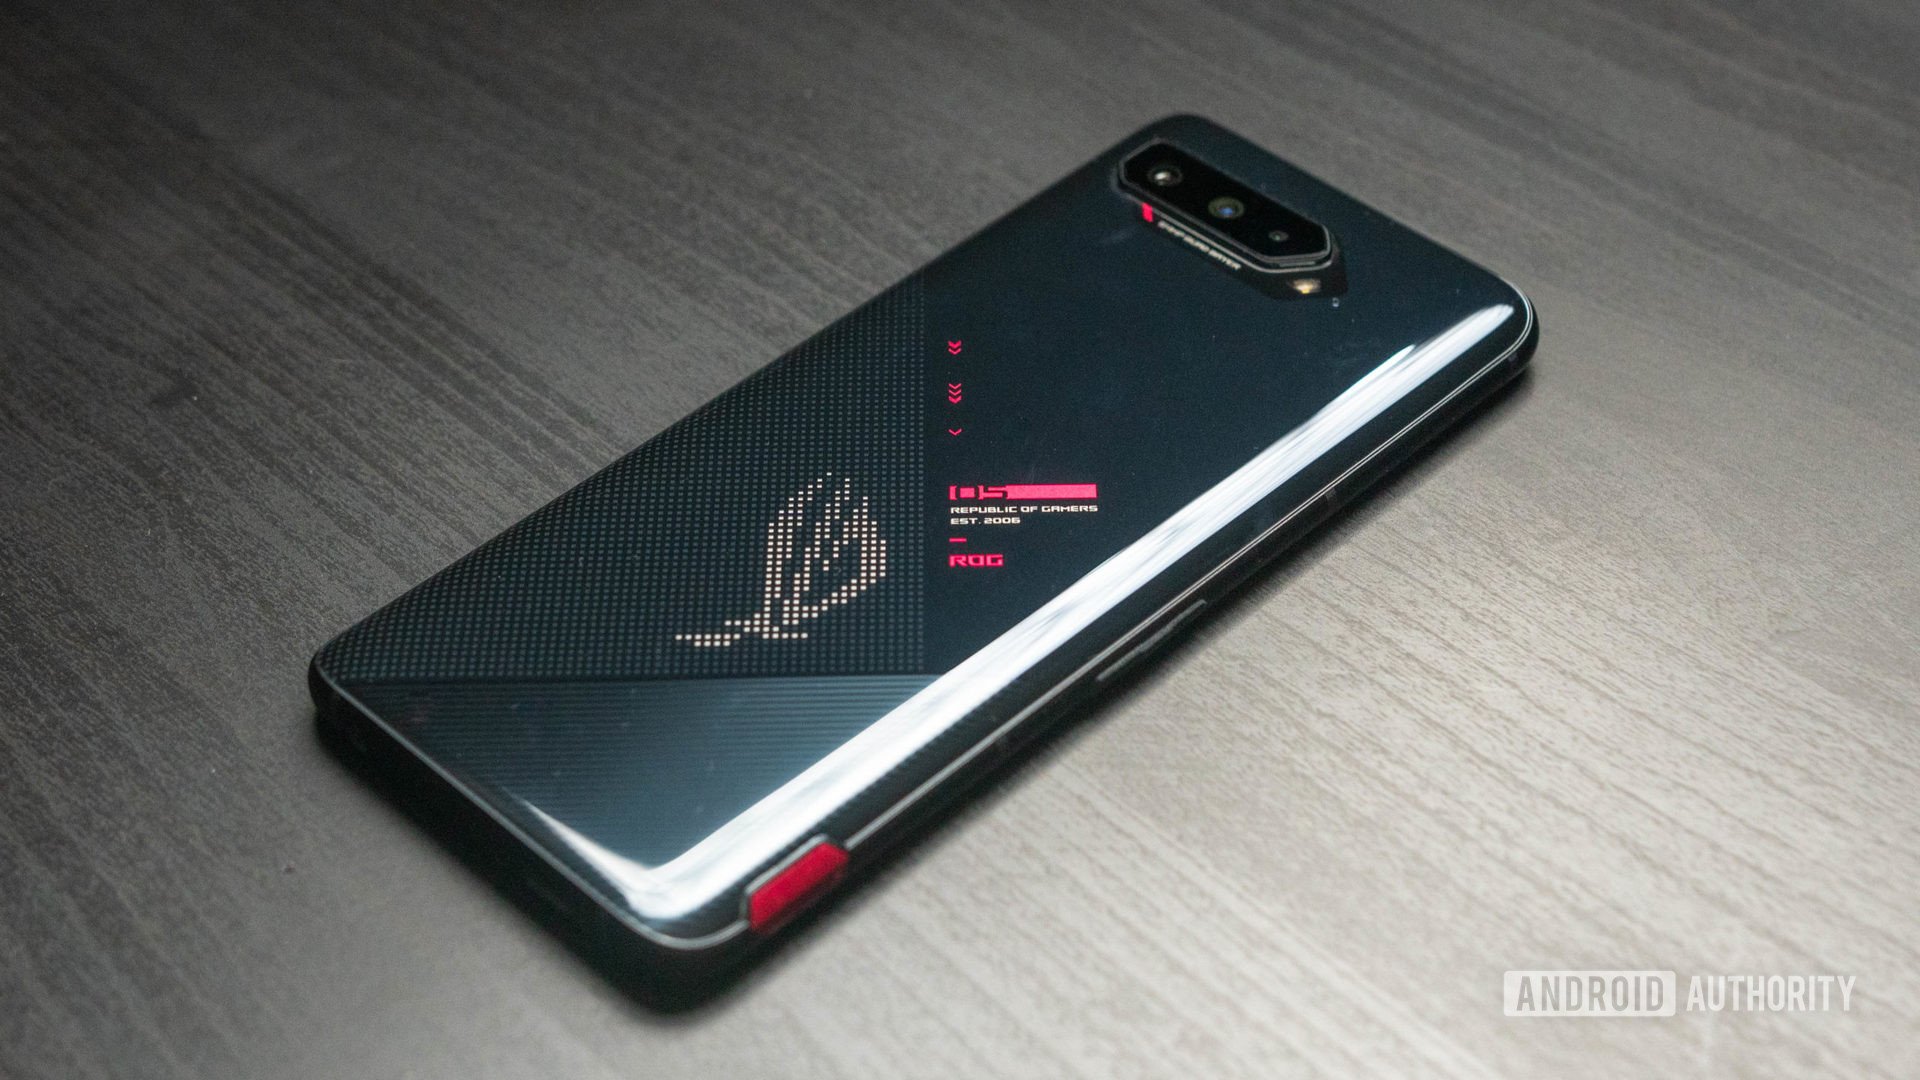 Asus ROG Phone rear of the device at an angle